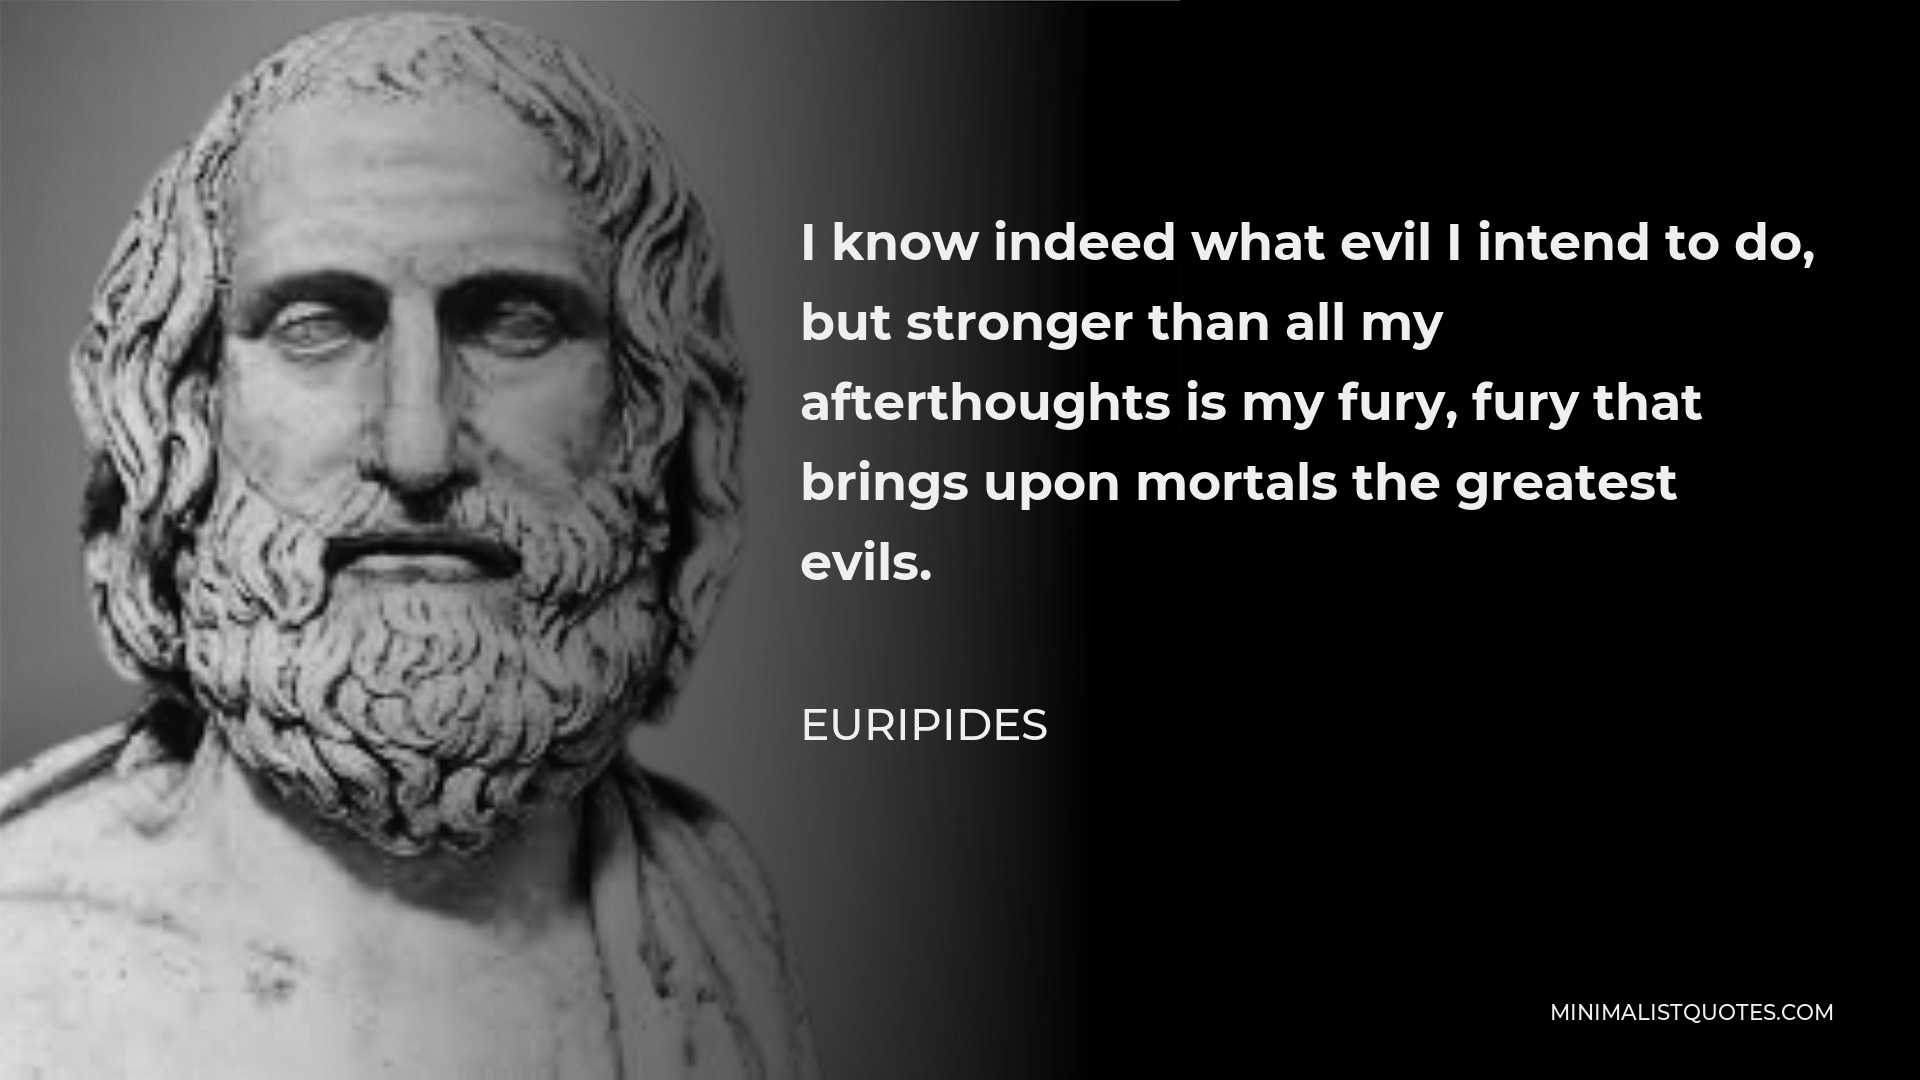 Euripides Quote - I know indeed what evil I intend to do, but stronger than all my afterthoughts is my fury, fury that brings upon mortals the greatest evils.